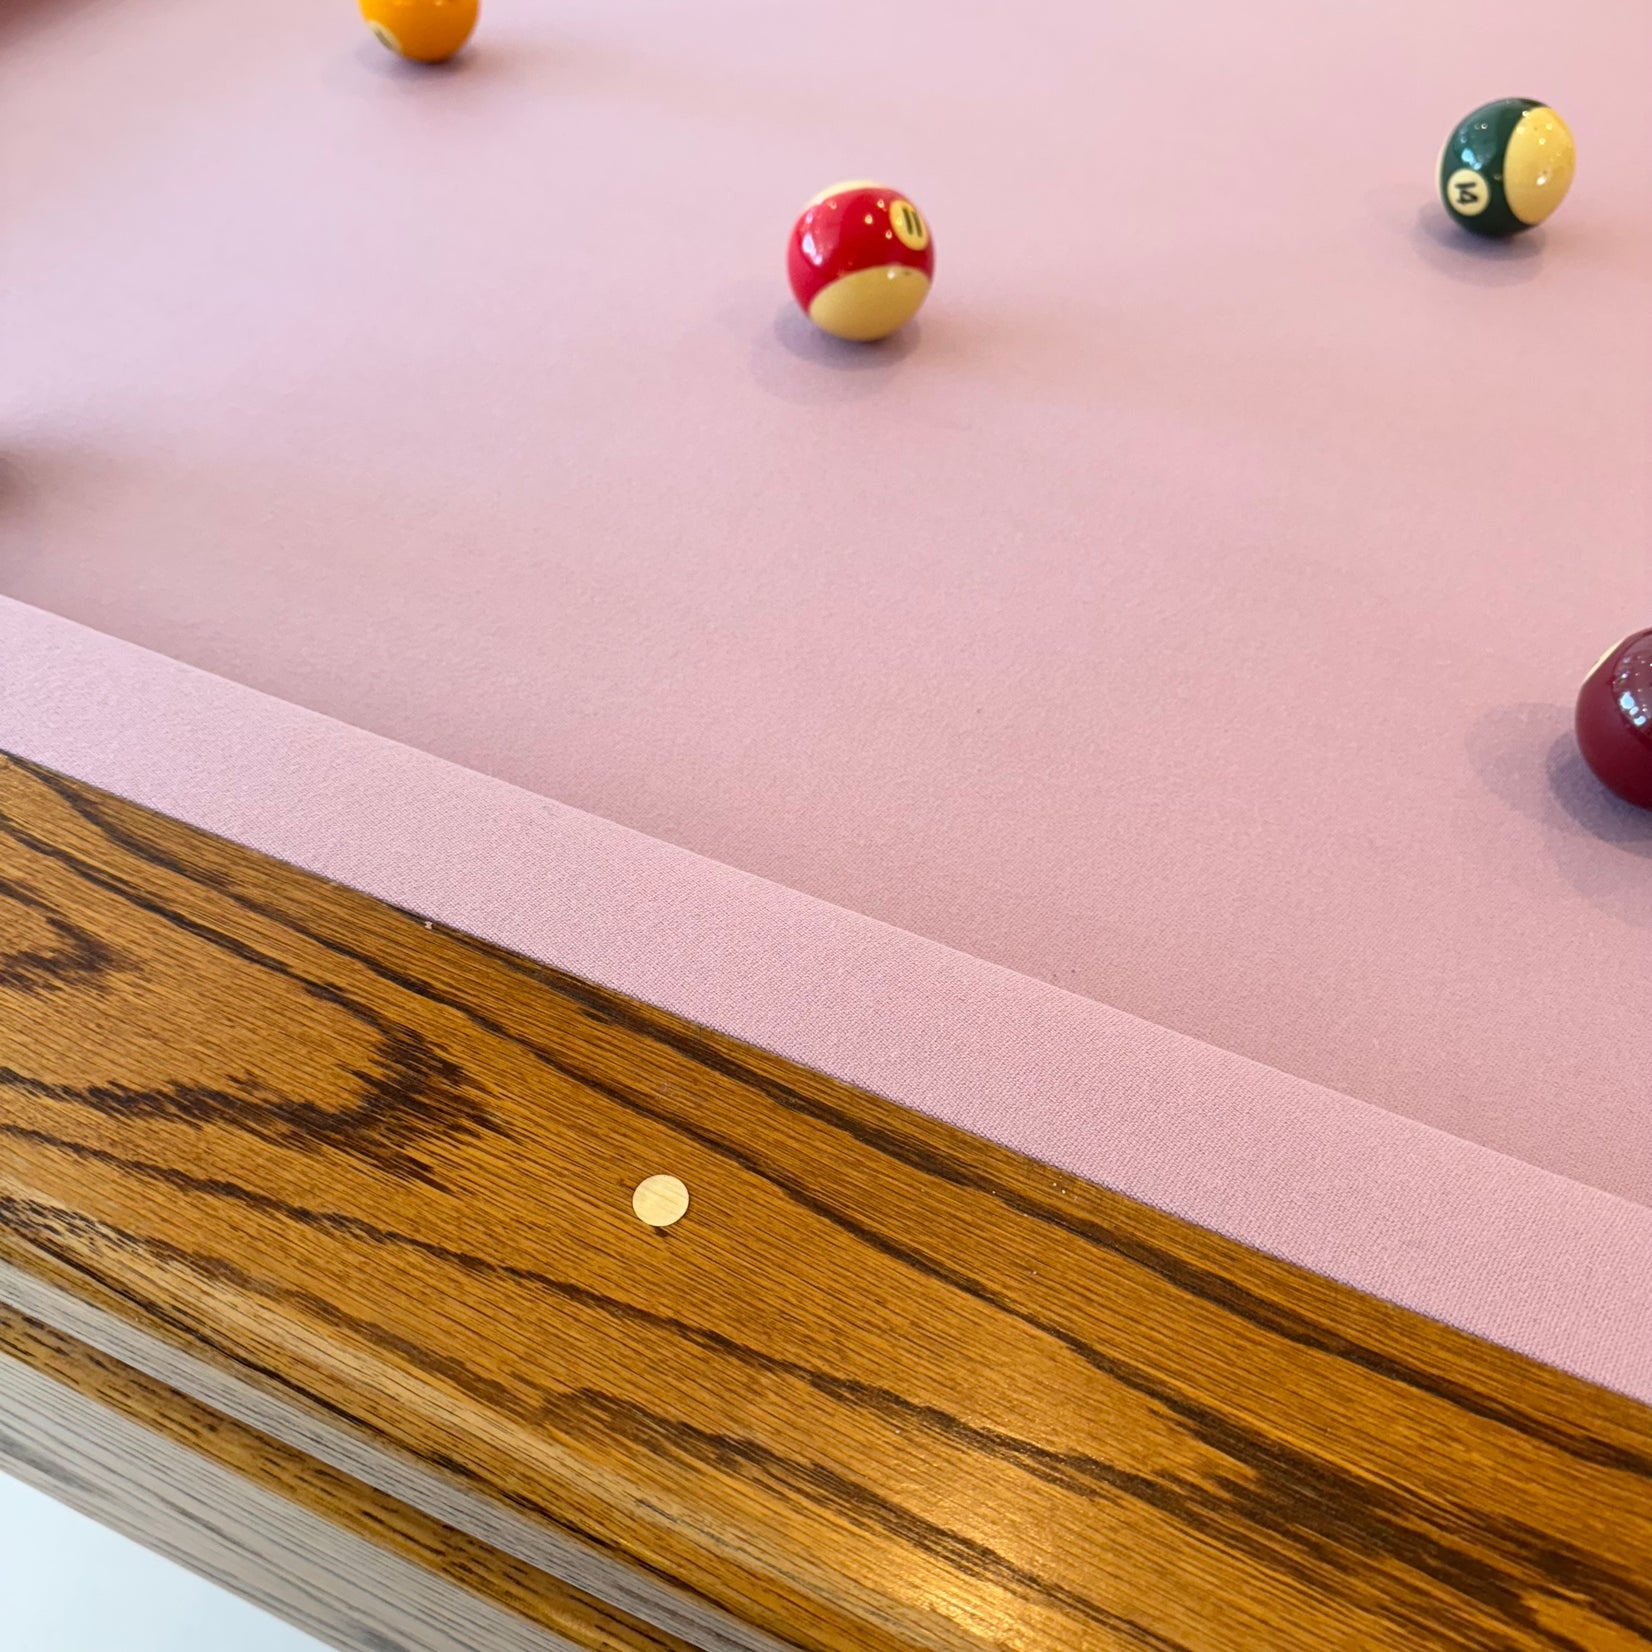 Oak and Brass Pool Table